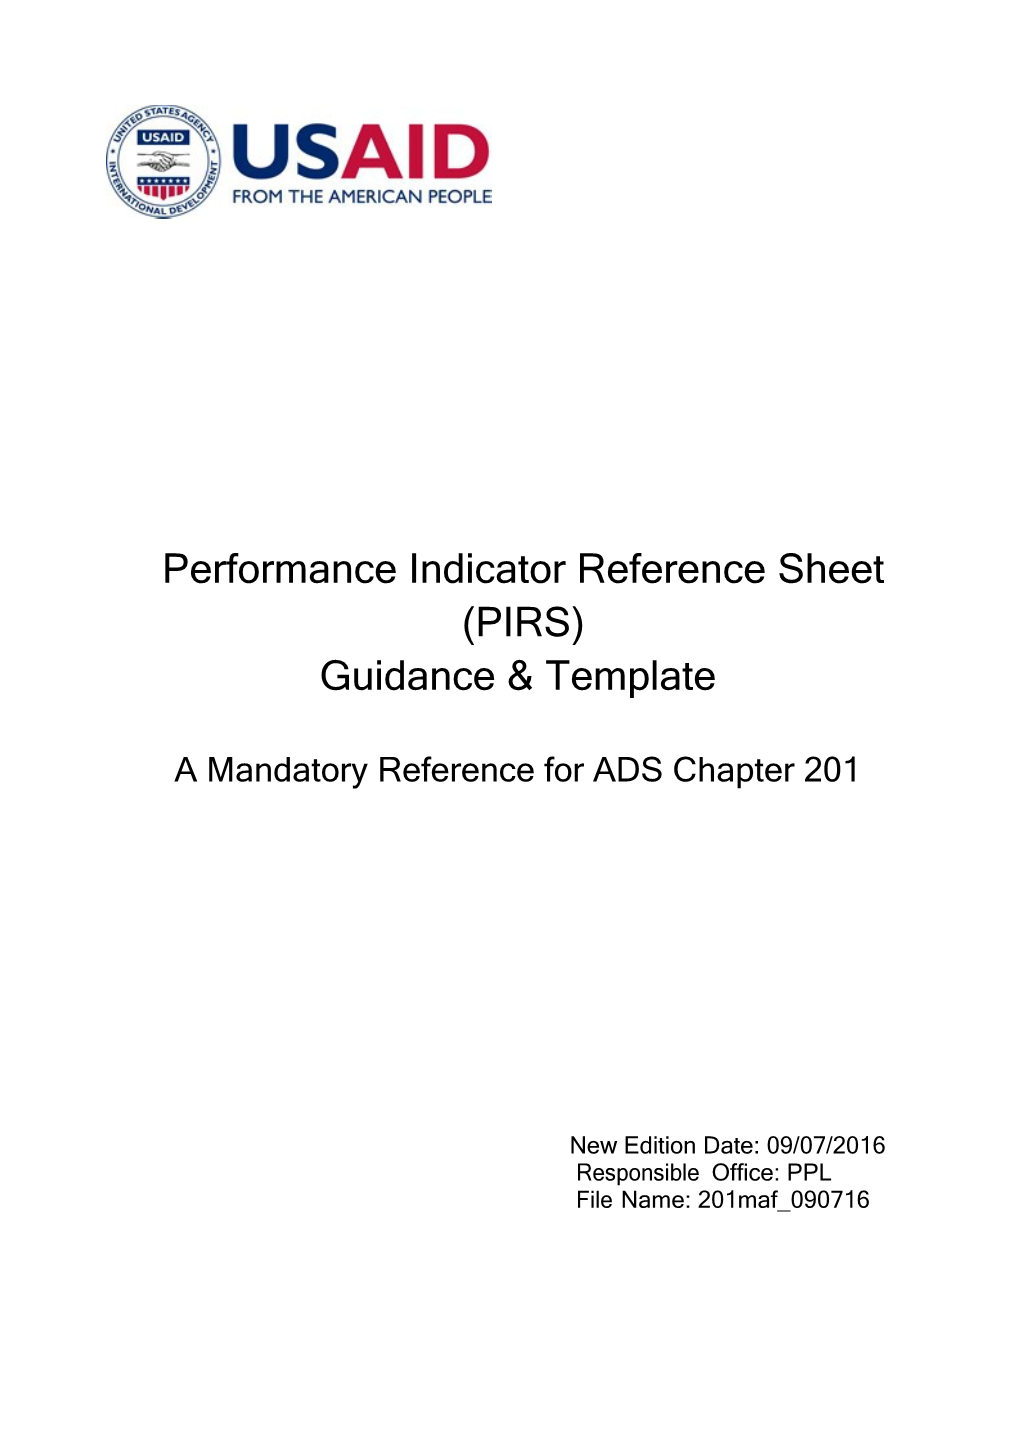 Performance Indicator Reference Sheet (PIRS) Guidance & Template